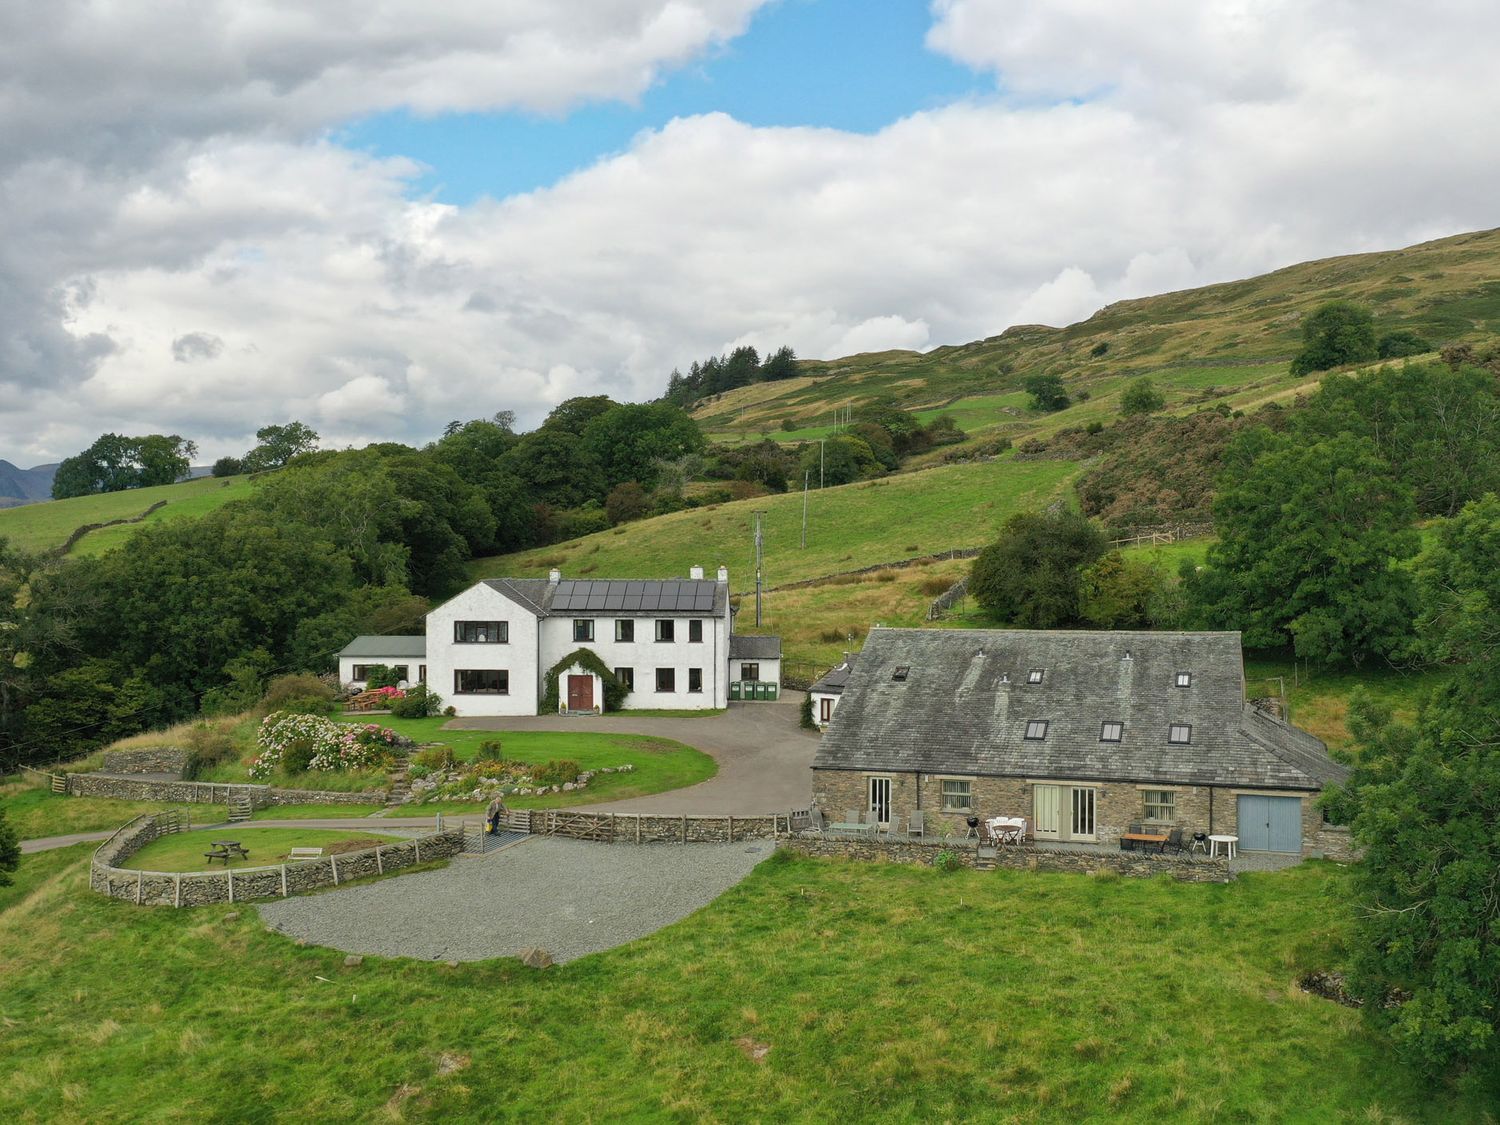 Ghyll Bank Barn, The Lake District And Cumbria